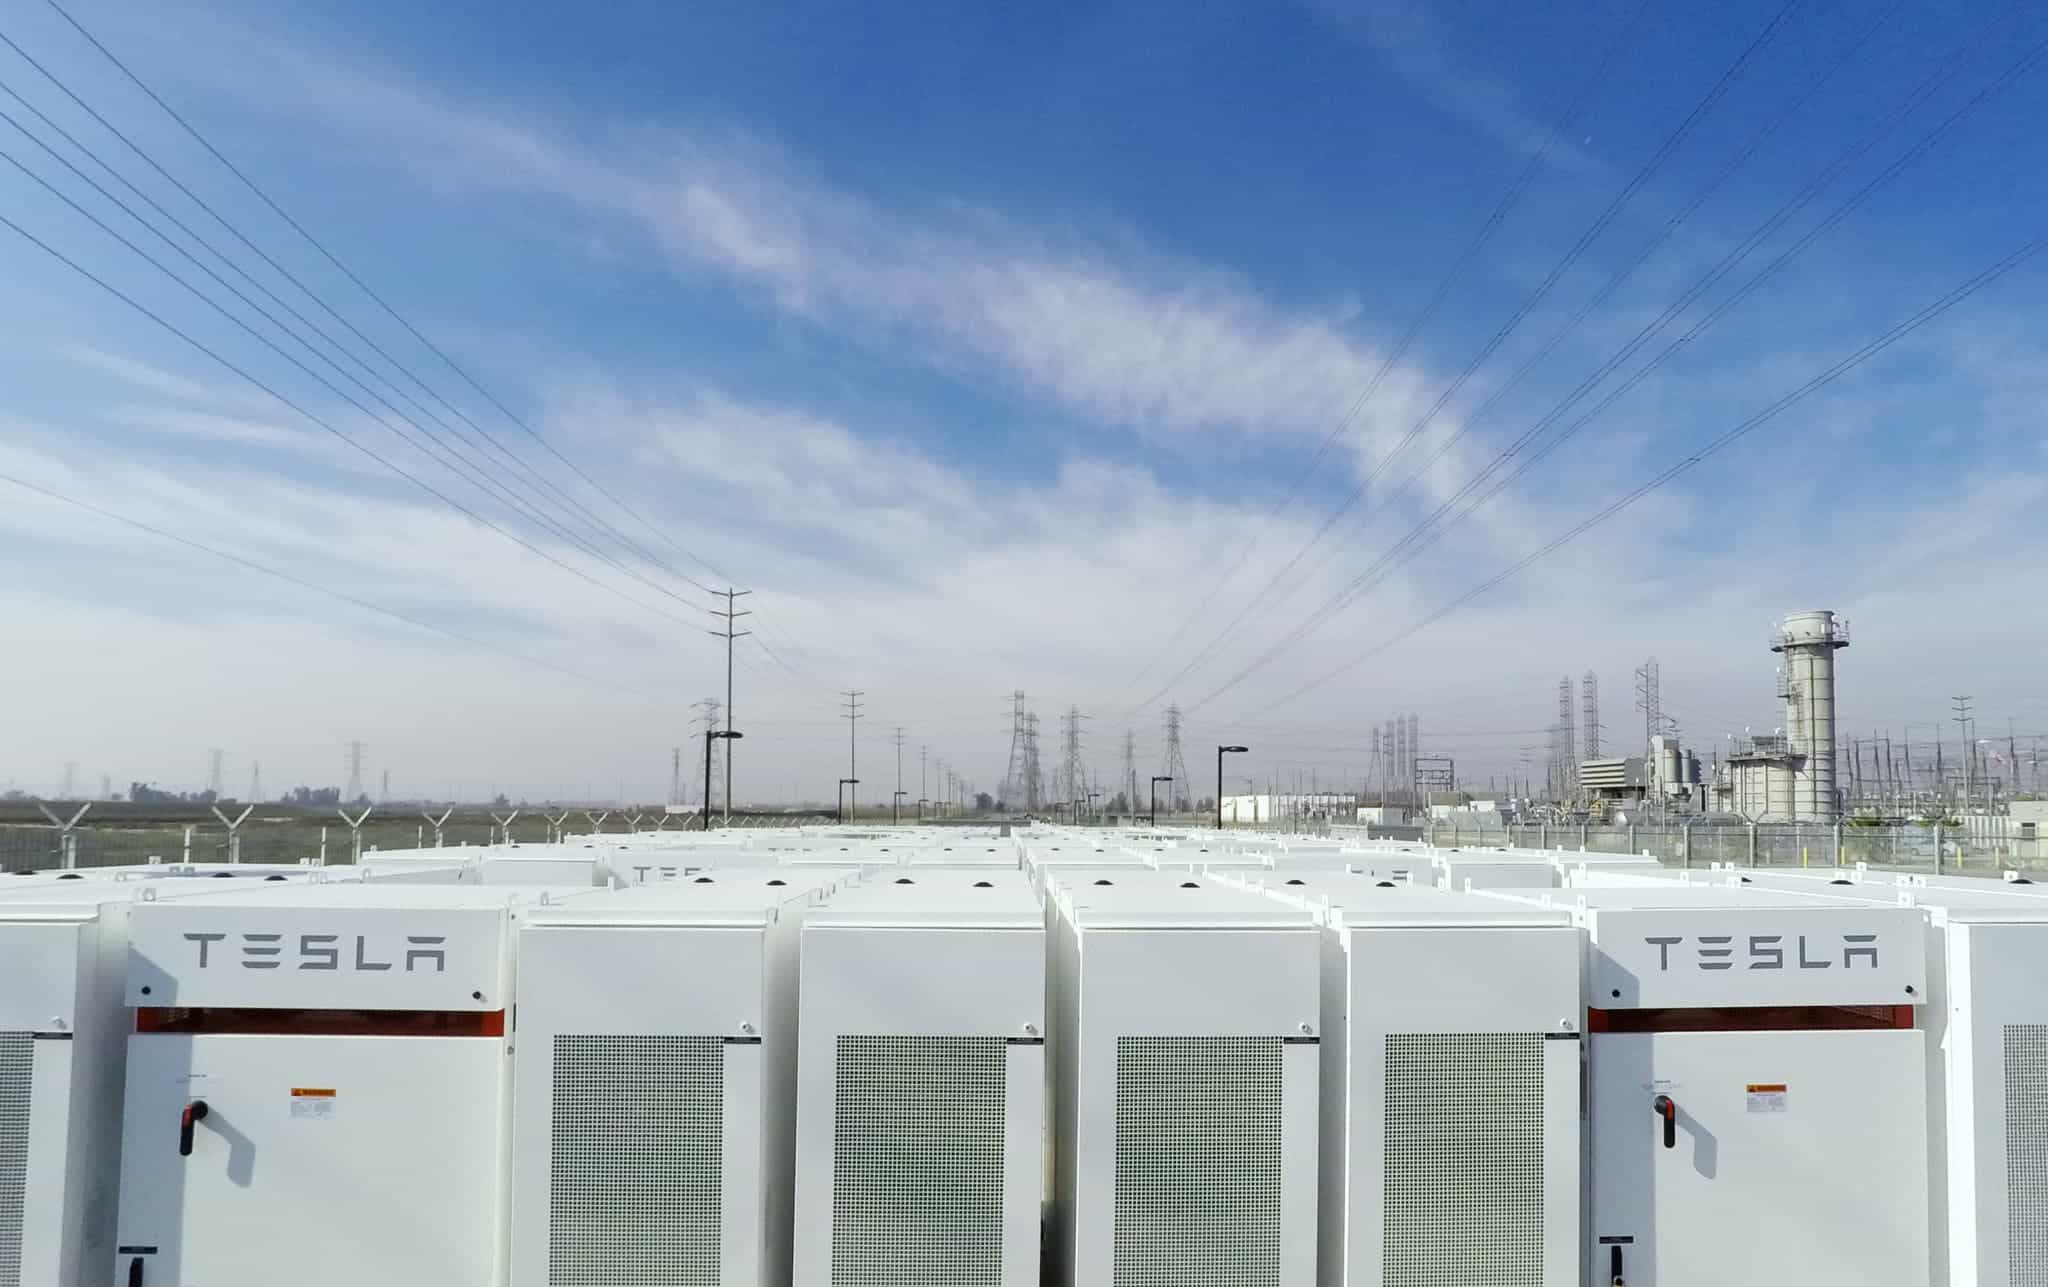 Tesla battery packs awaiting to be unleashed upon California's power grid.
Image credits Tesla.